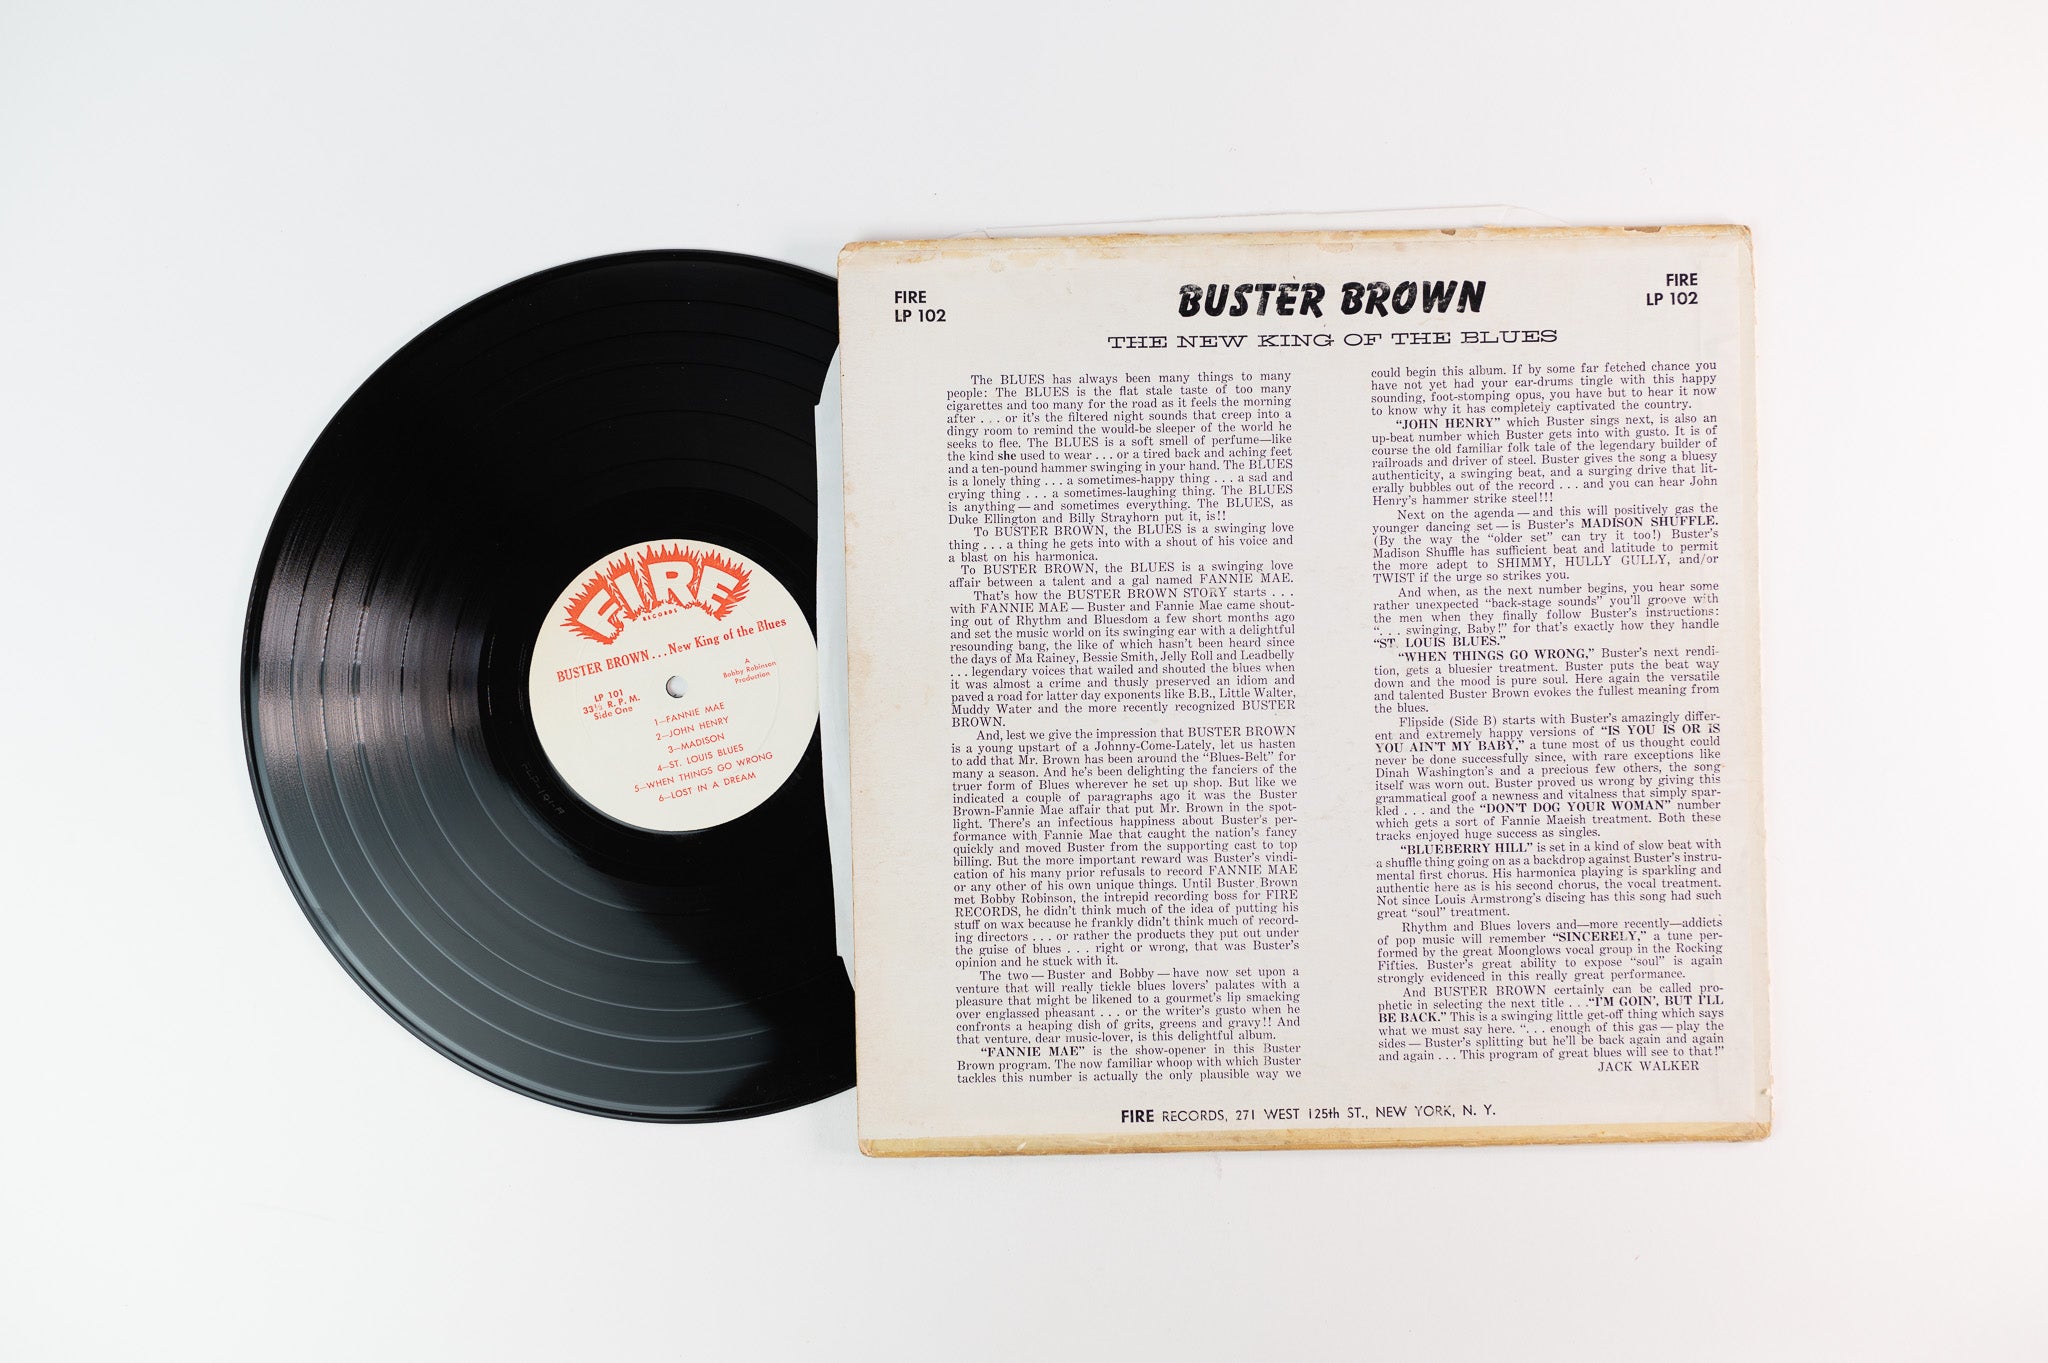 Buster Brown - New King Of The Blues on Fire